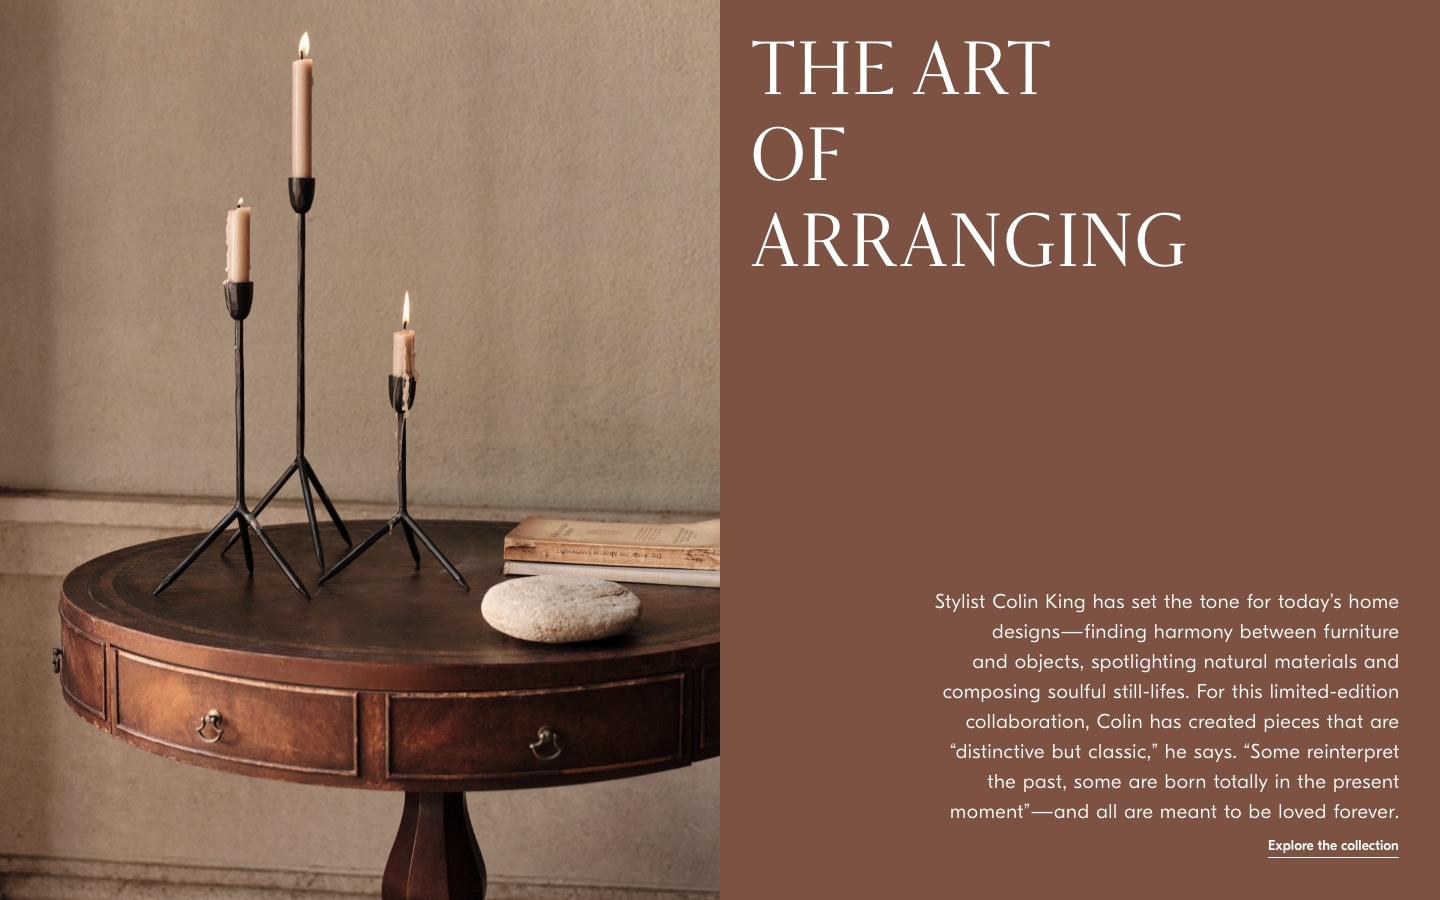 Explore the collection. The art of arranging. Stylist Colin King has set the tone for today's home designs. 